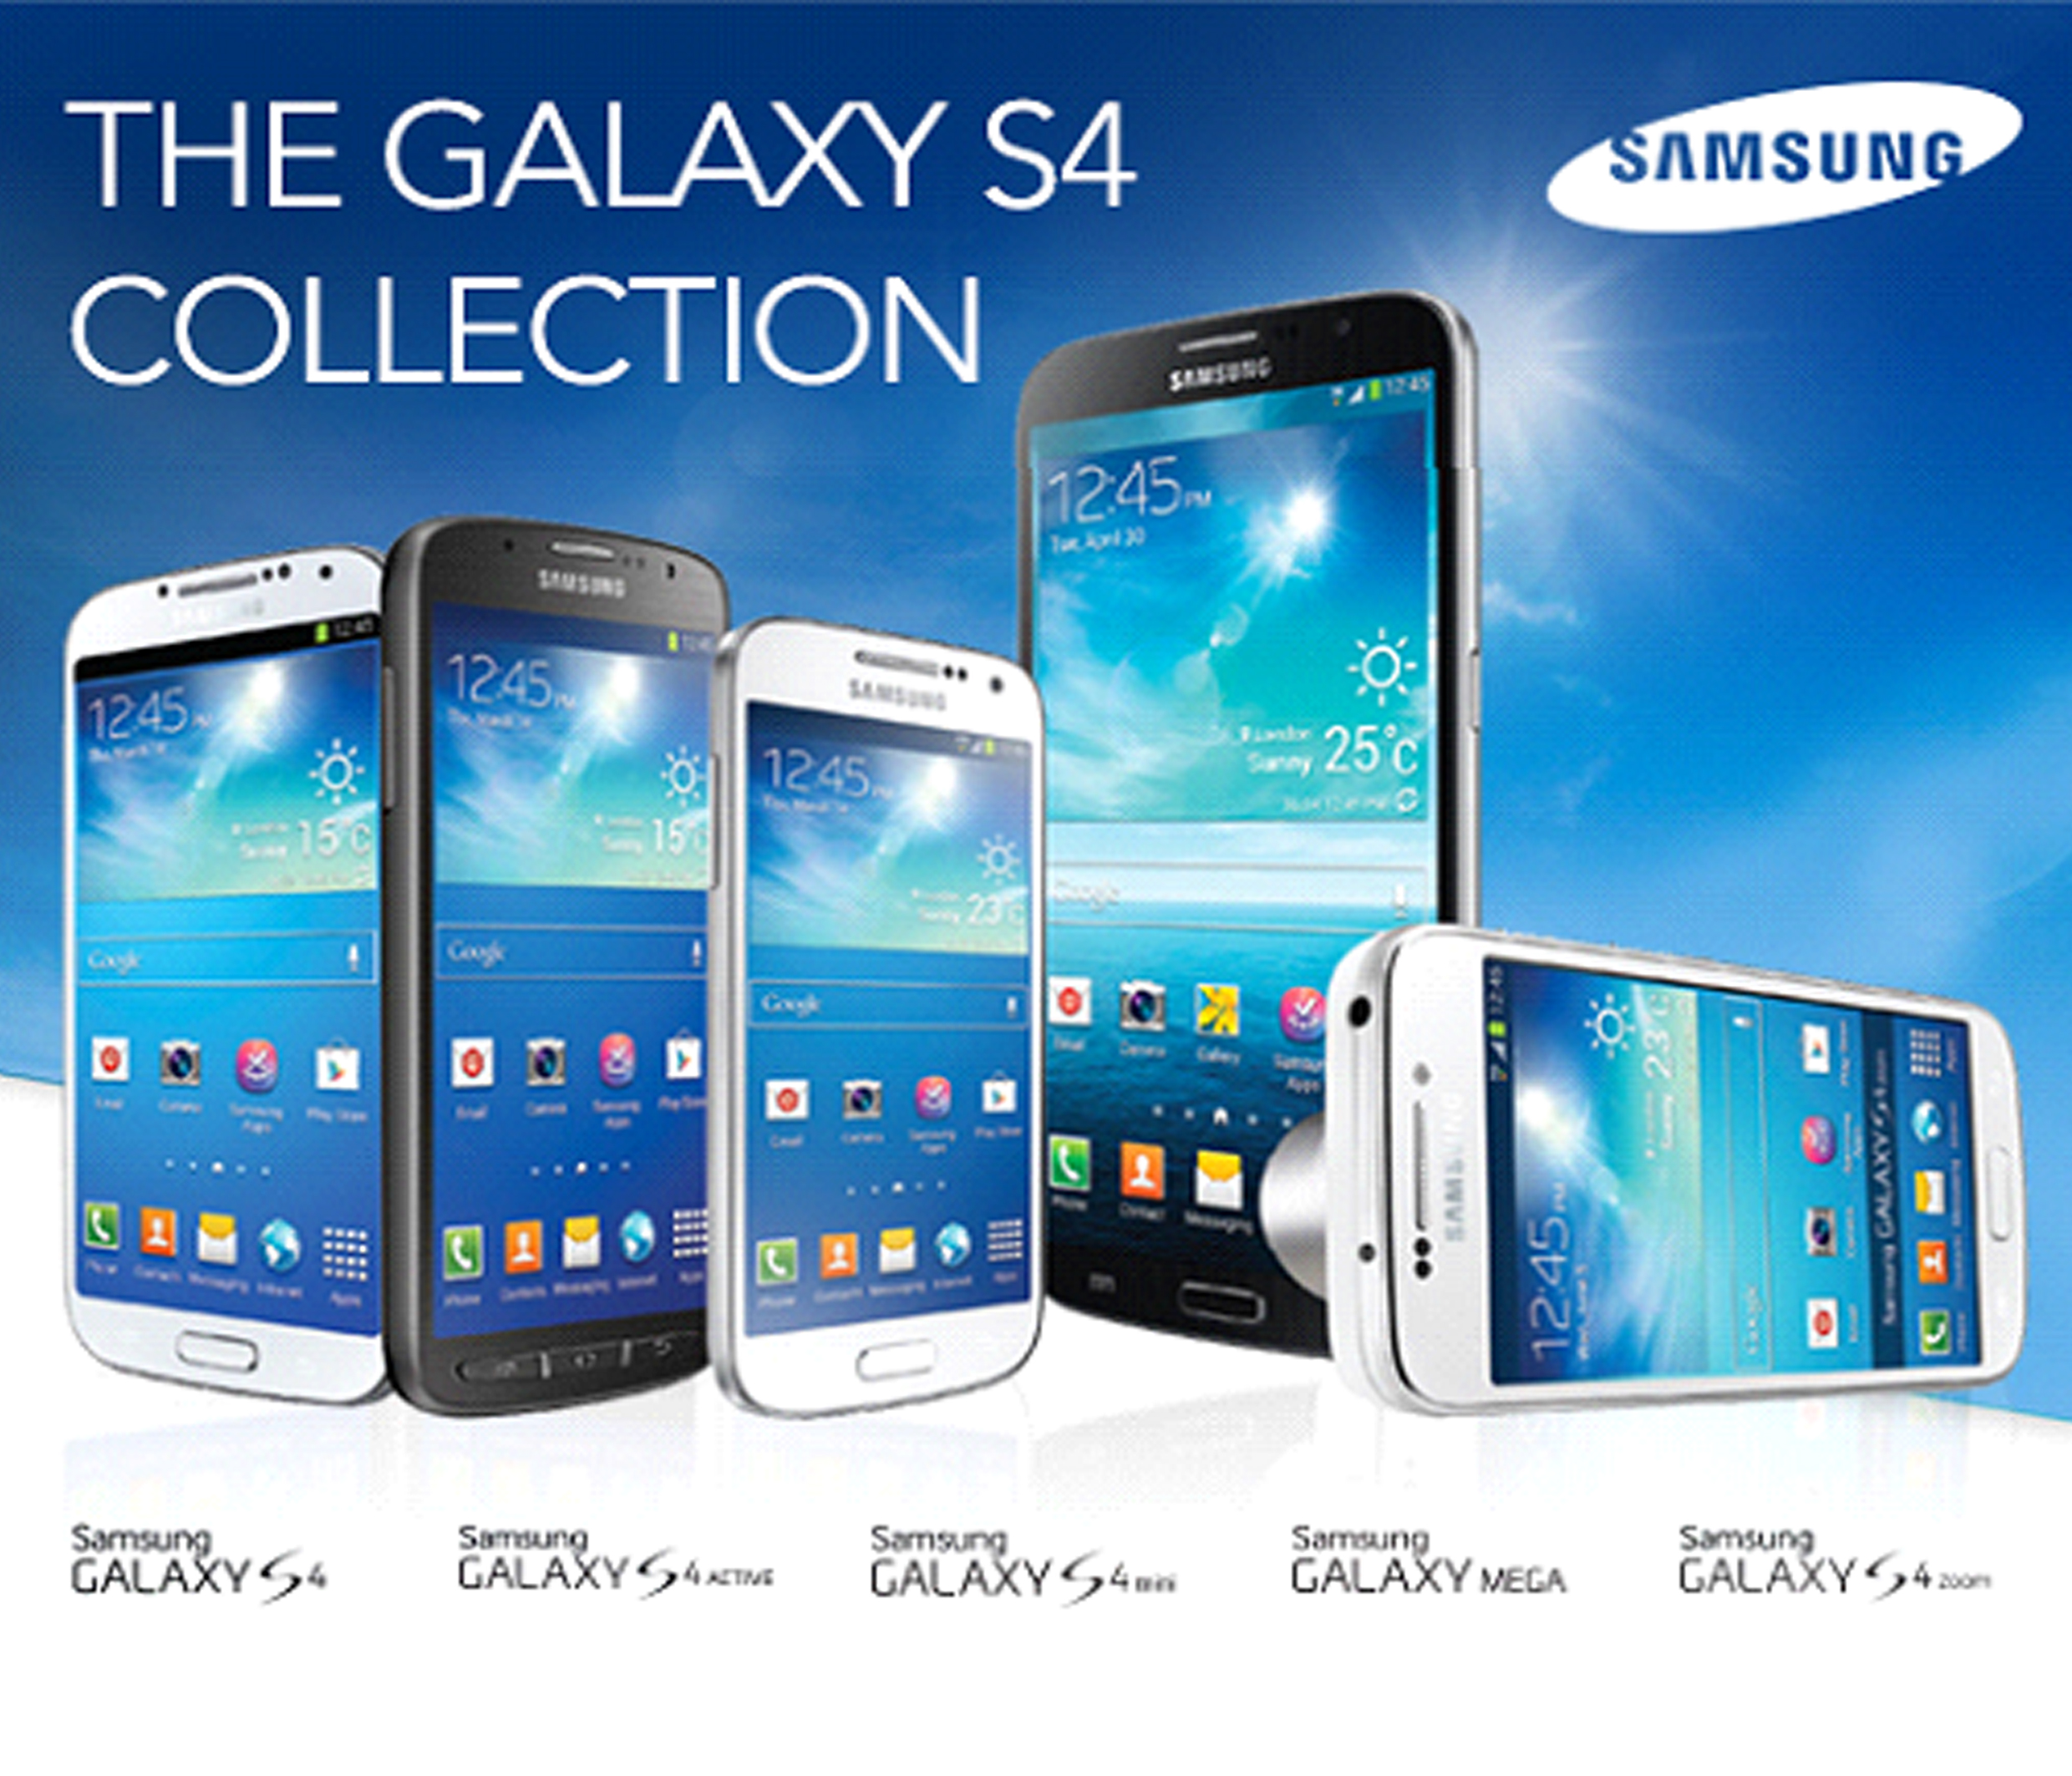 Samsung Introduce The Additions To Their Galaxy Family Saying